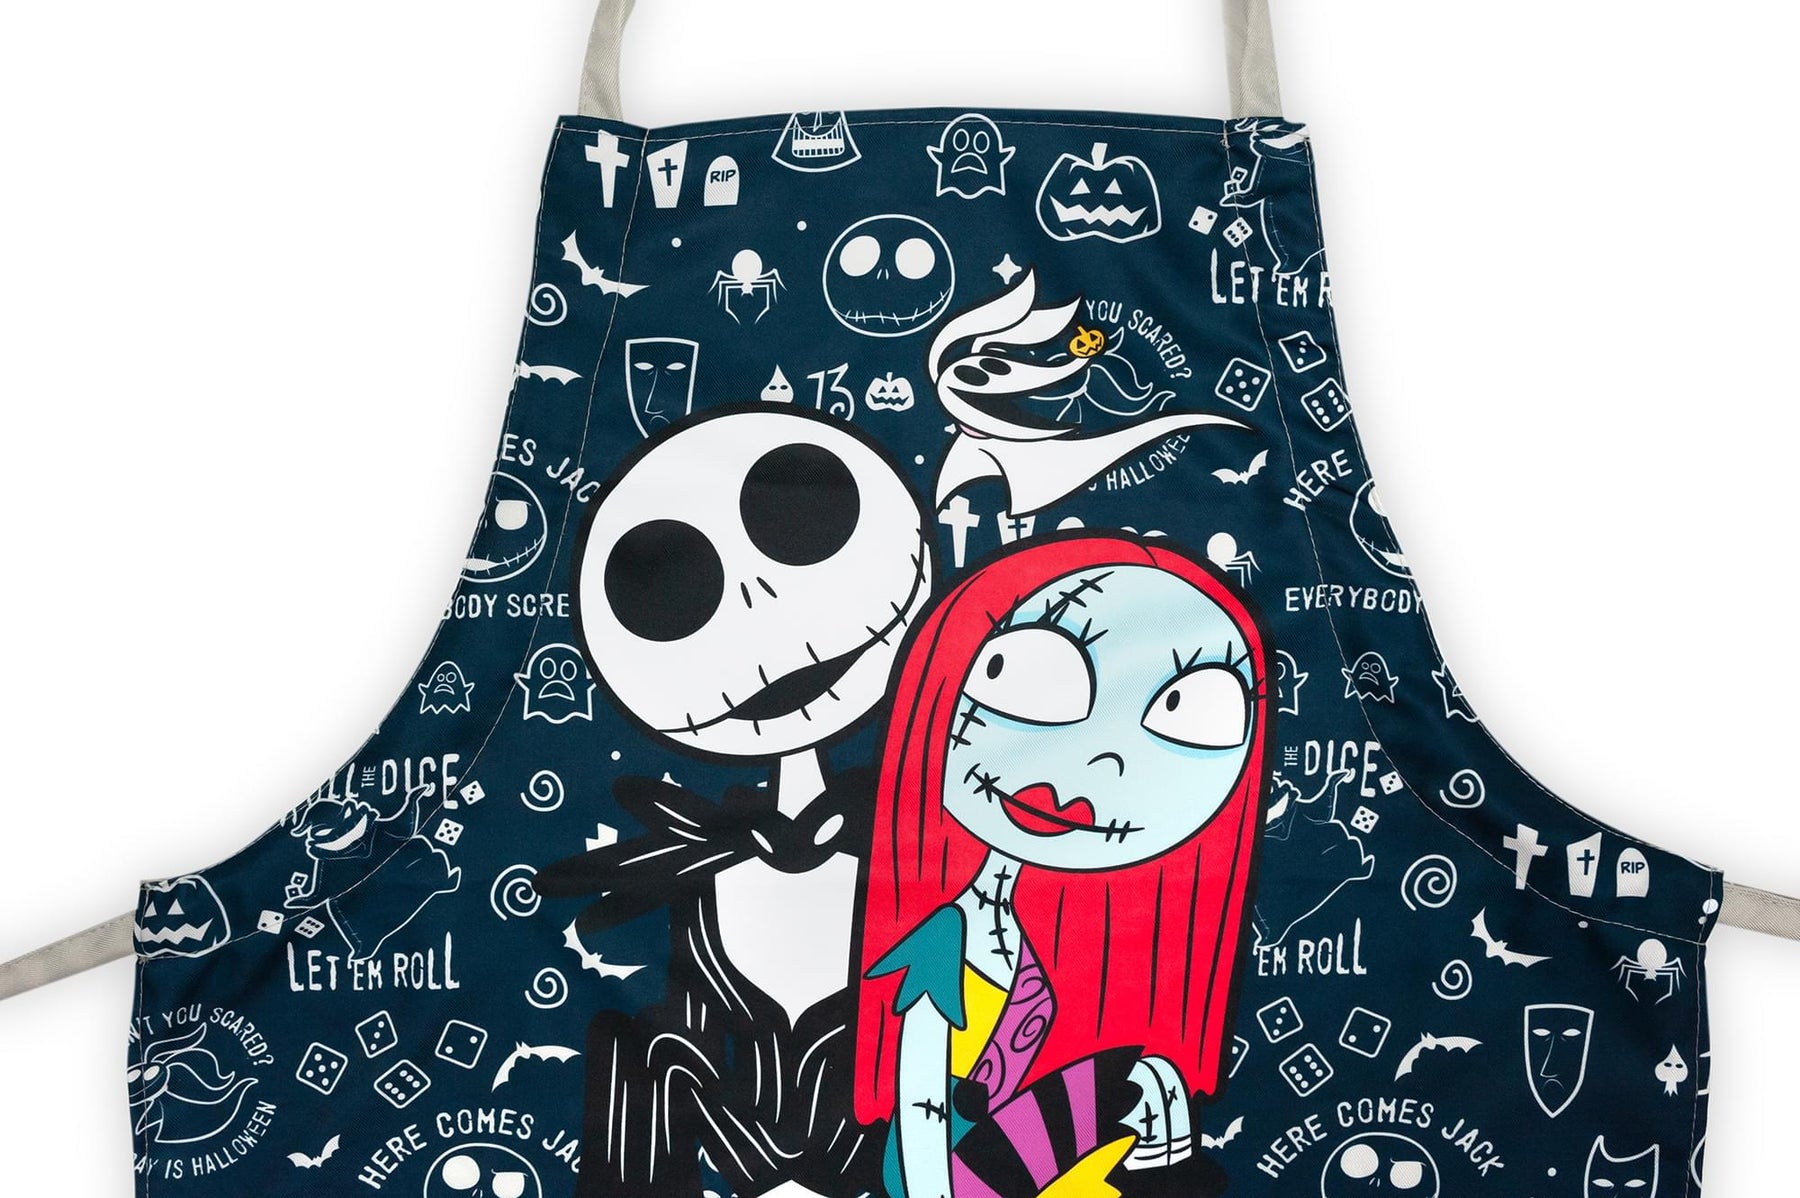 Nightmare Before Christmas Apron with Jack & Sally and Adjustable Straps - Black